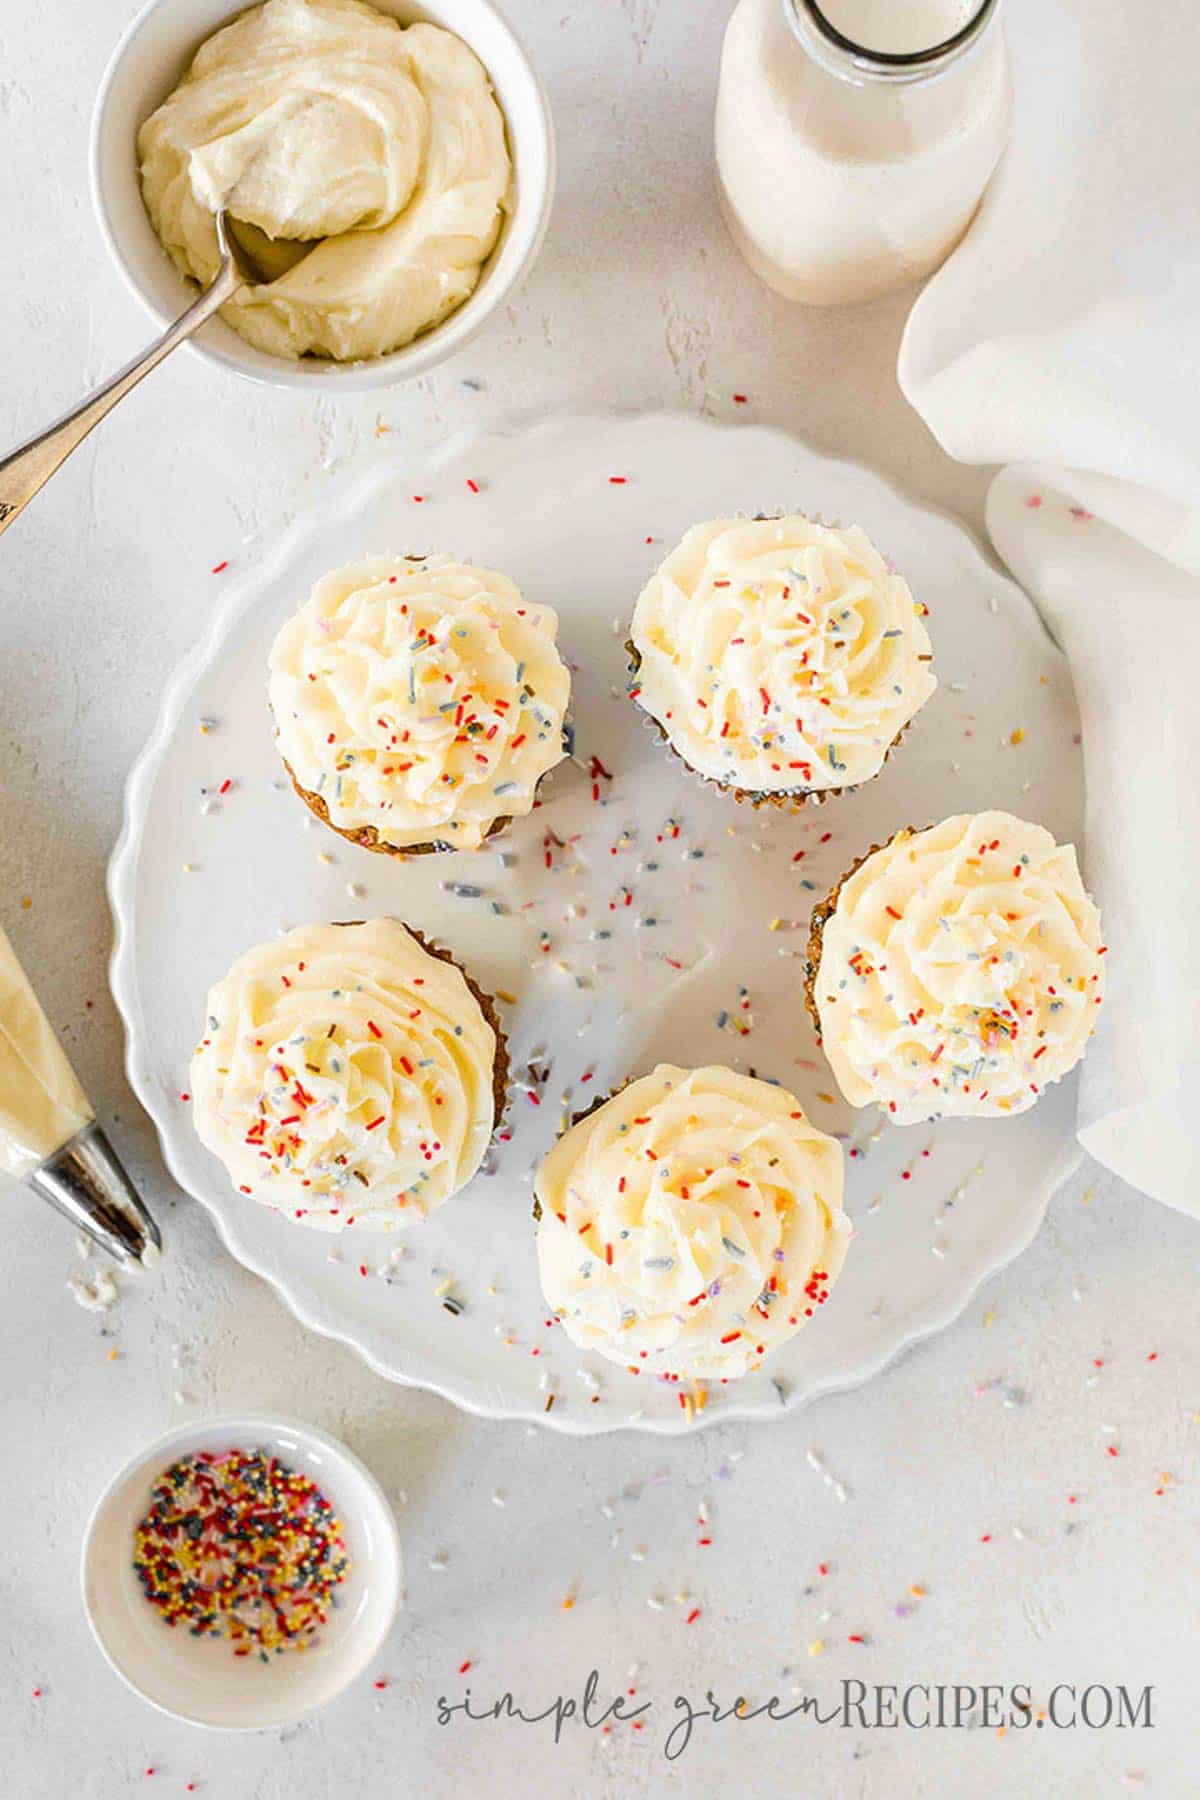 Cupcakes frosted with vanilla buttercream and topped with colourful sprinkles, on a white surface